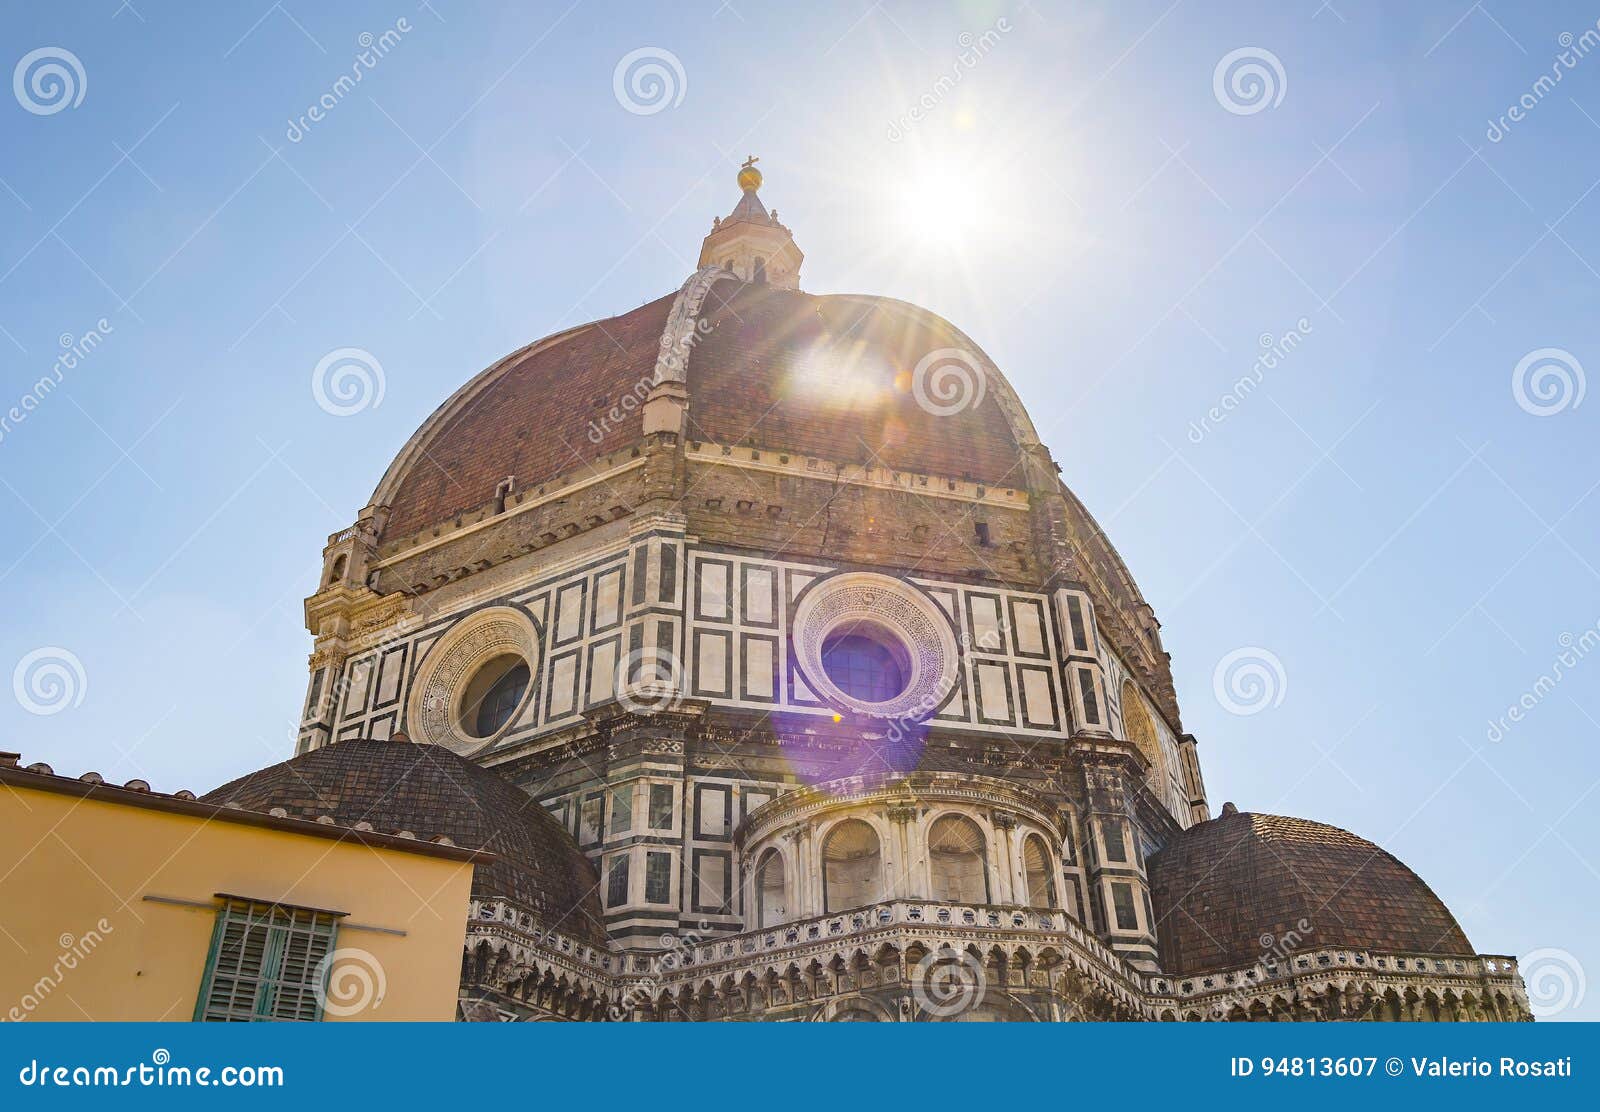 the famous brunelleschi`s dome of the cathedral in florence